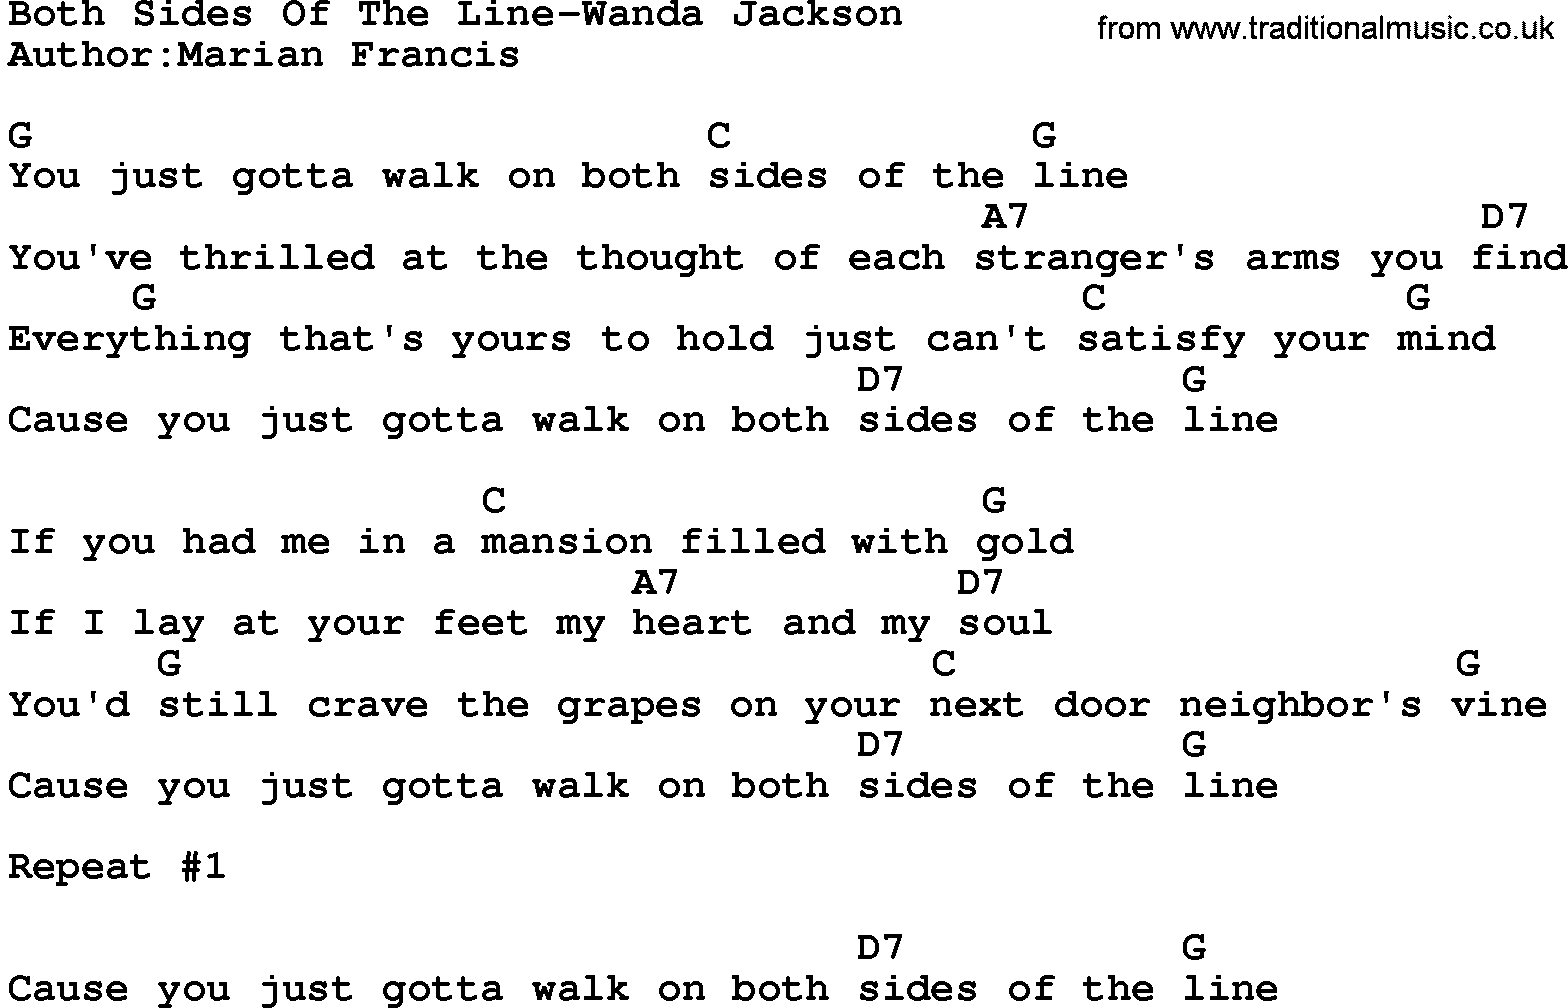 Country music song: Both Sides Of The Line-Wanda Jackson lyrics and chords